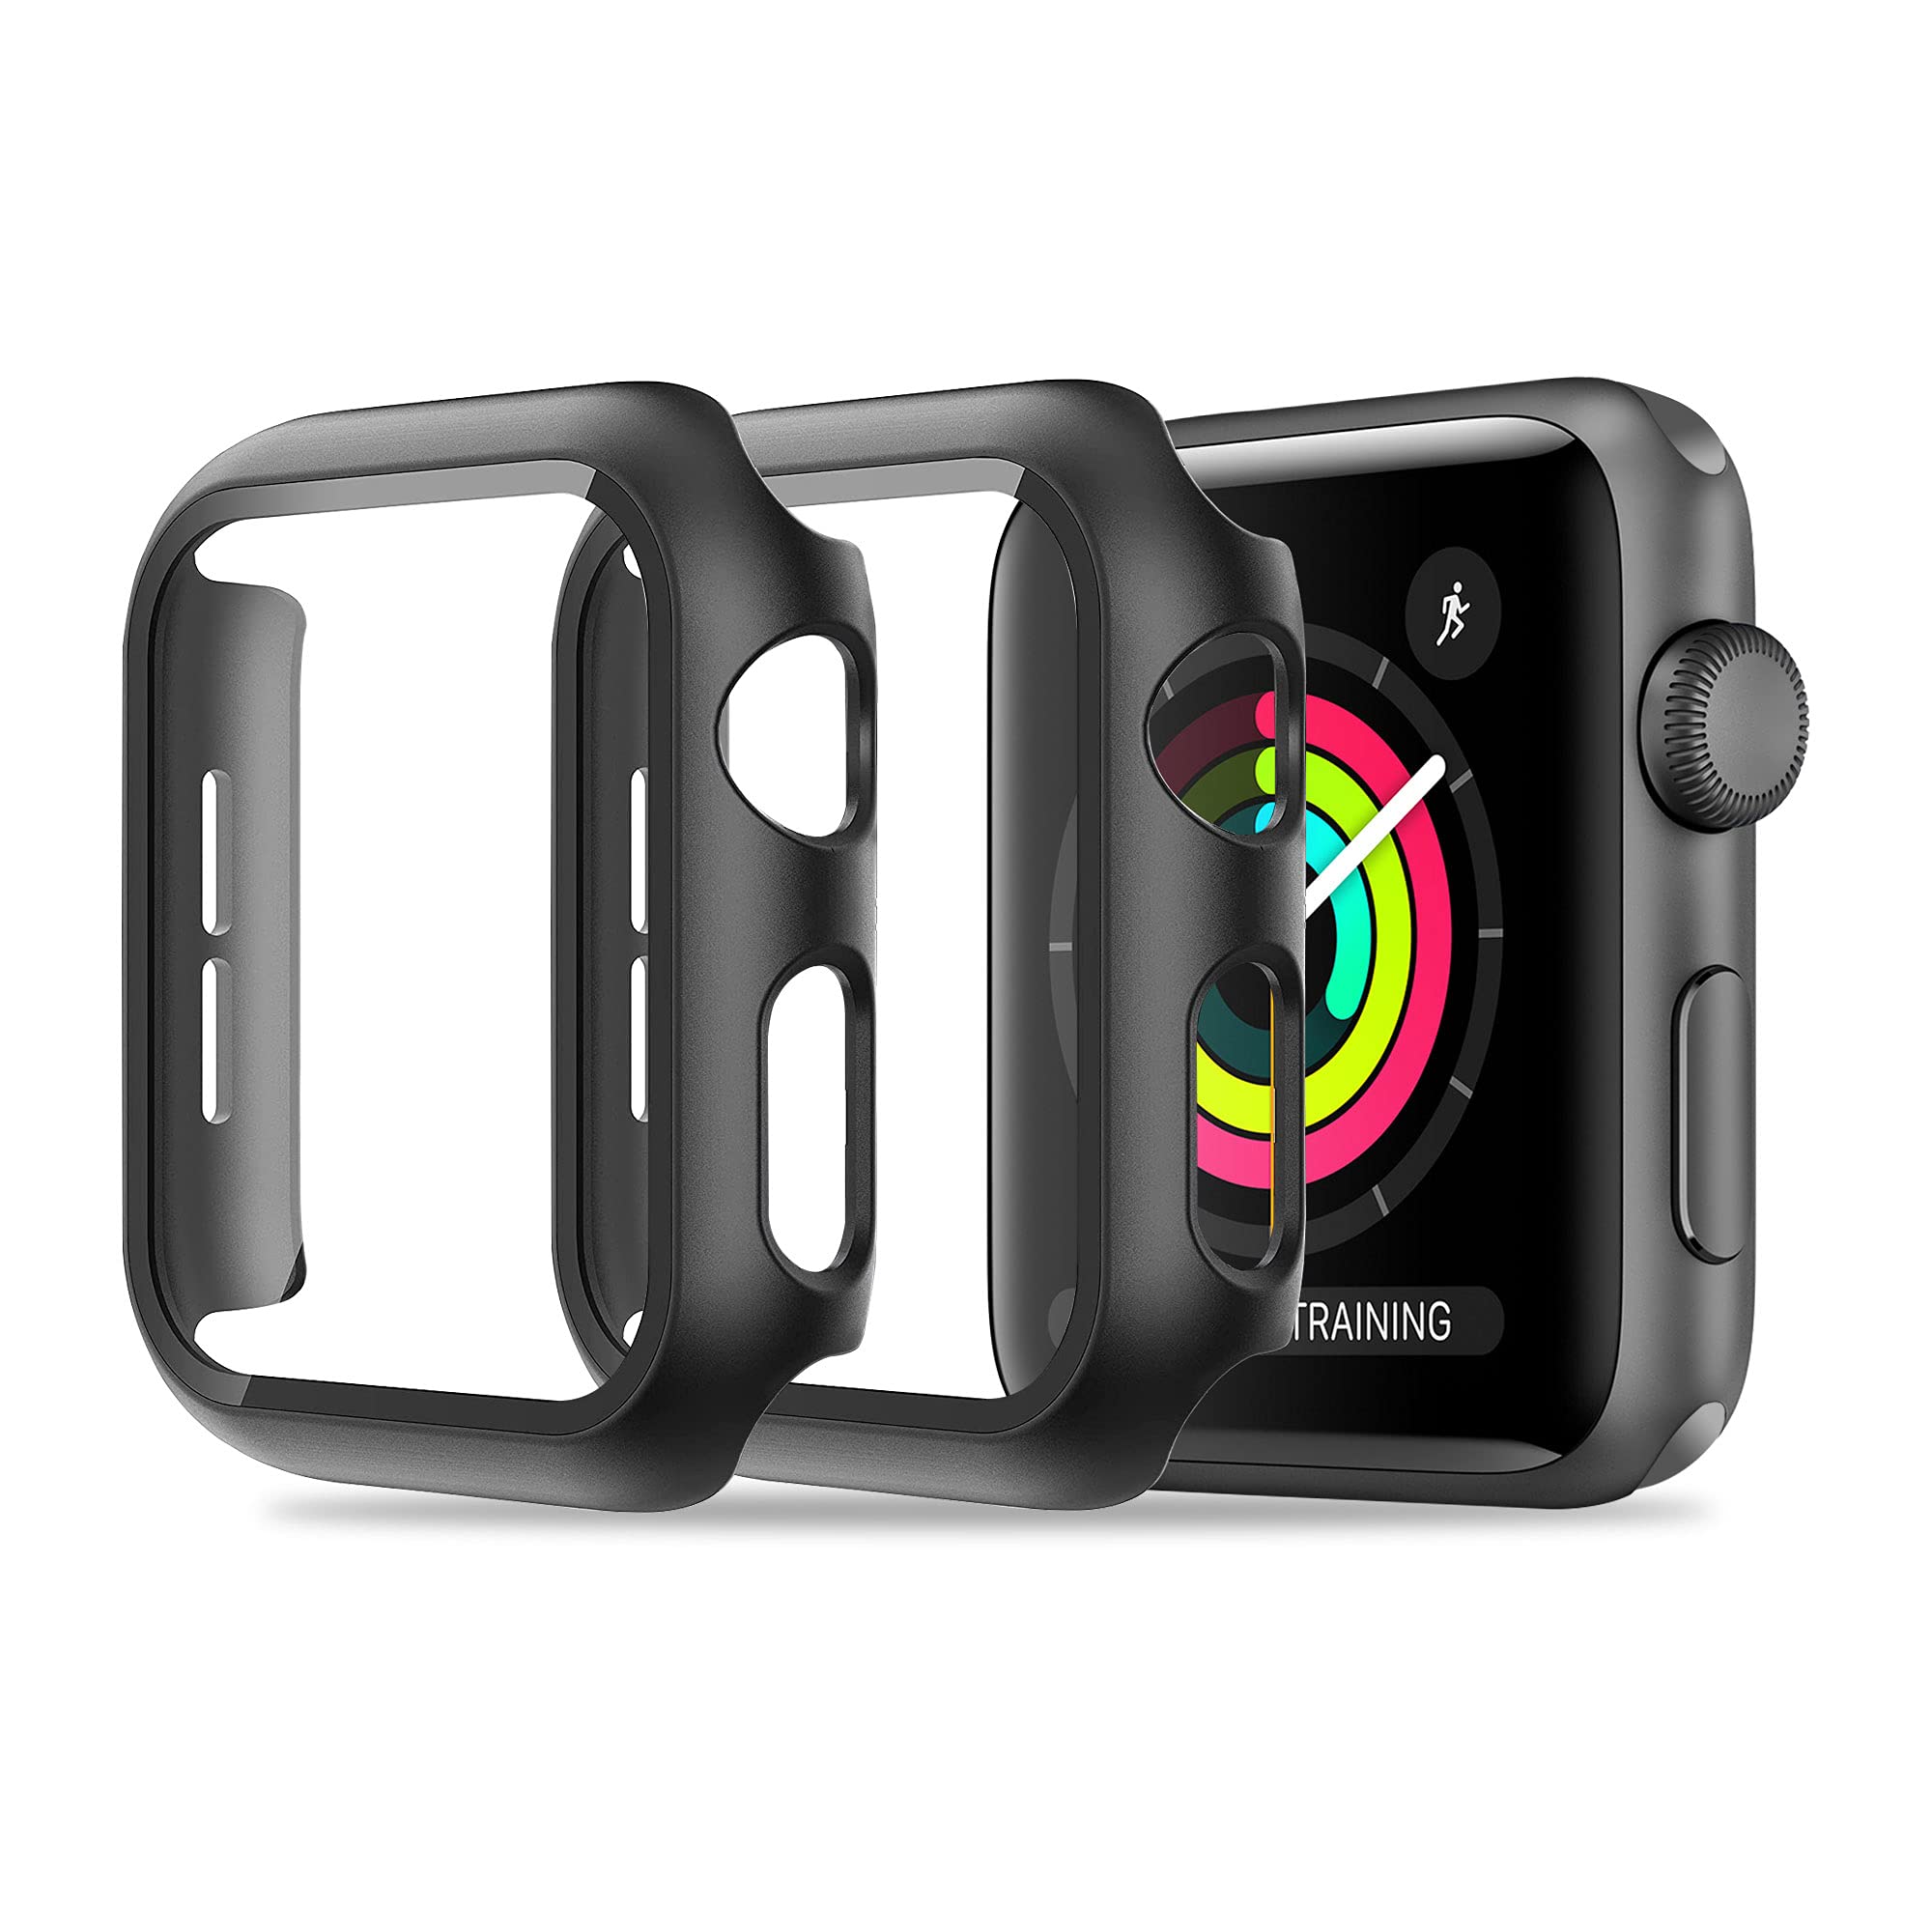 Uluq Case Compatible With Apple Watch Series 3 Series 2 Series 1 42Mm, Hard Pc All-Around Protective Cover With Tempered Hd Glas